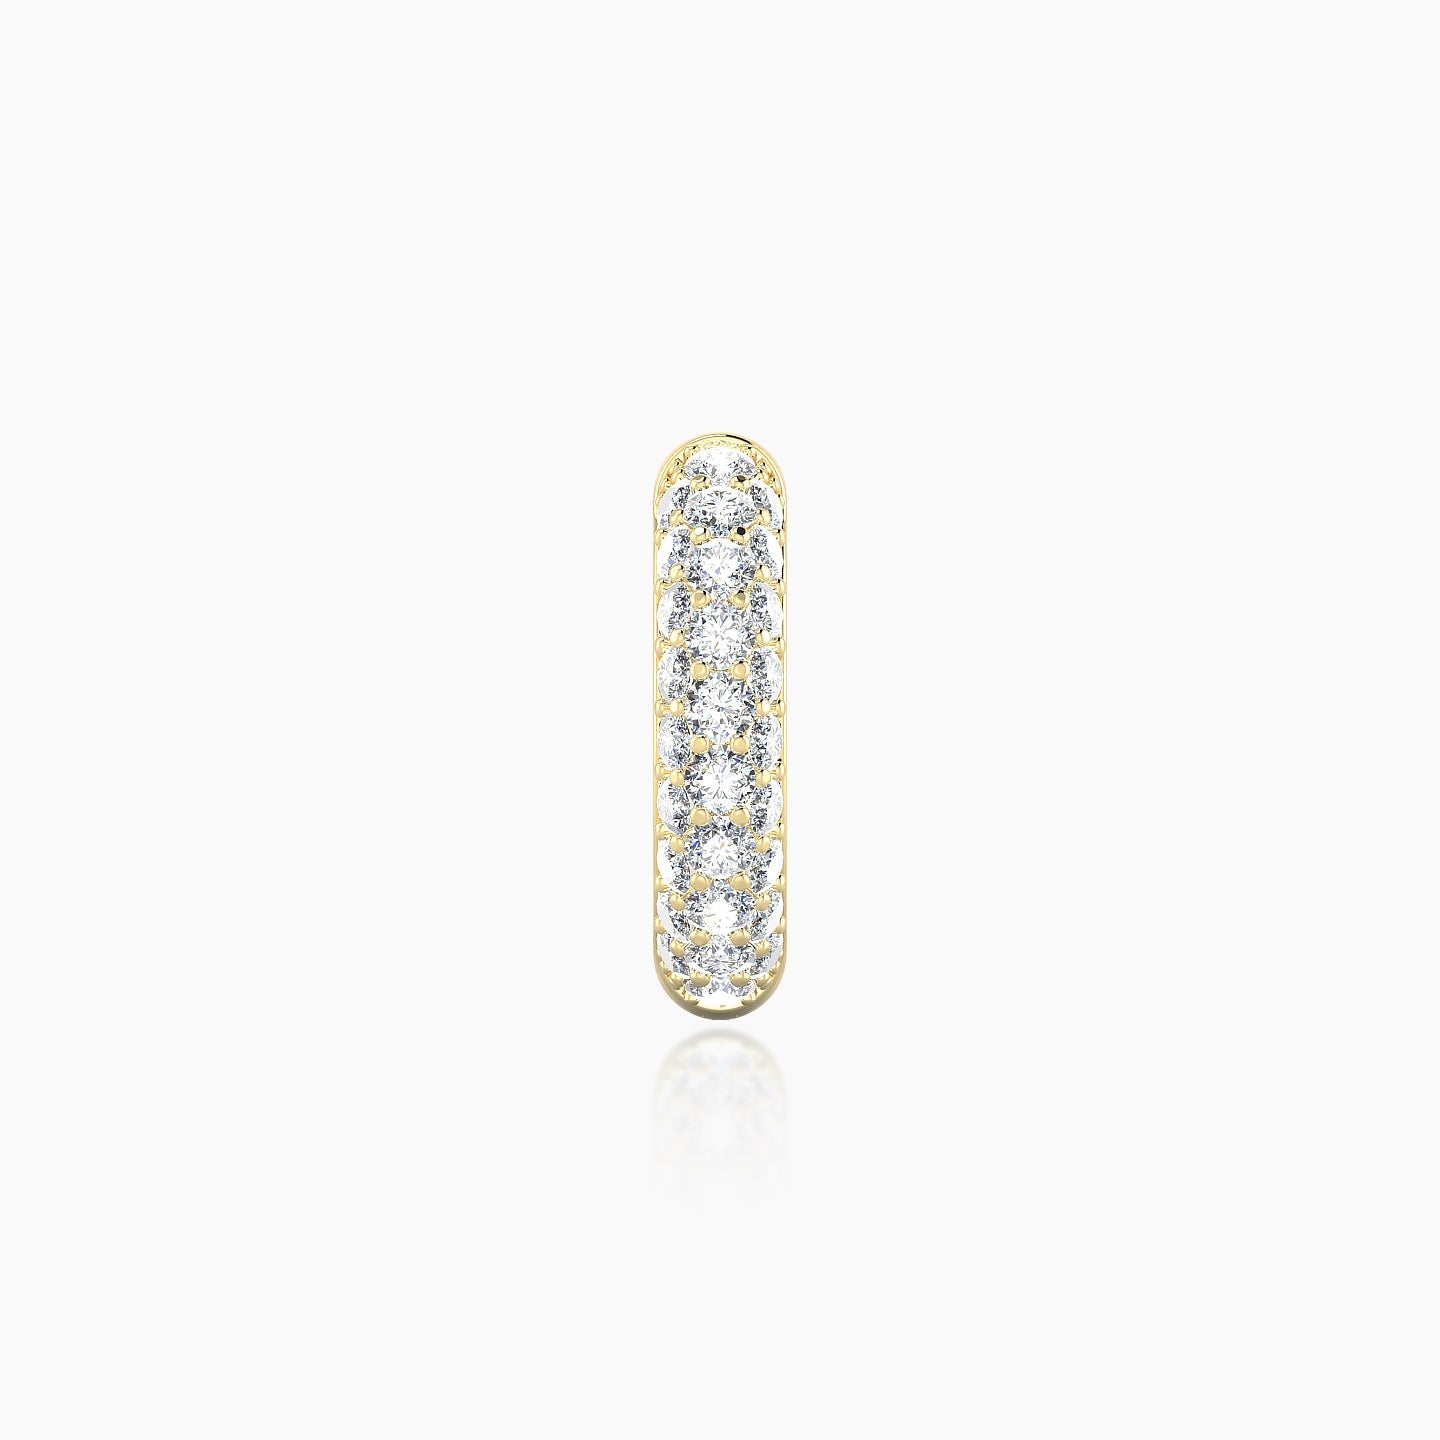 Theia | 18k Yellow Gold 8 mm Pave Diamond Nose Ring Piercing